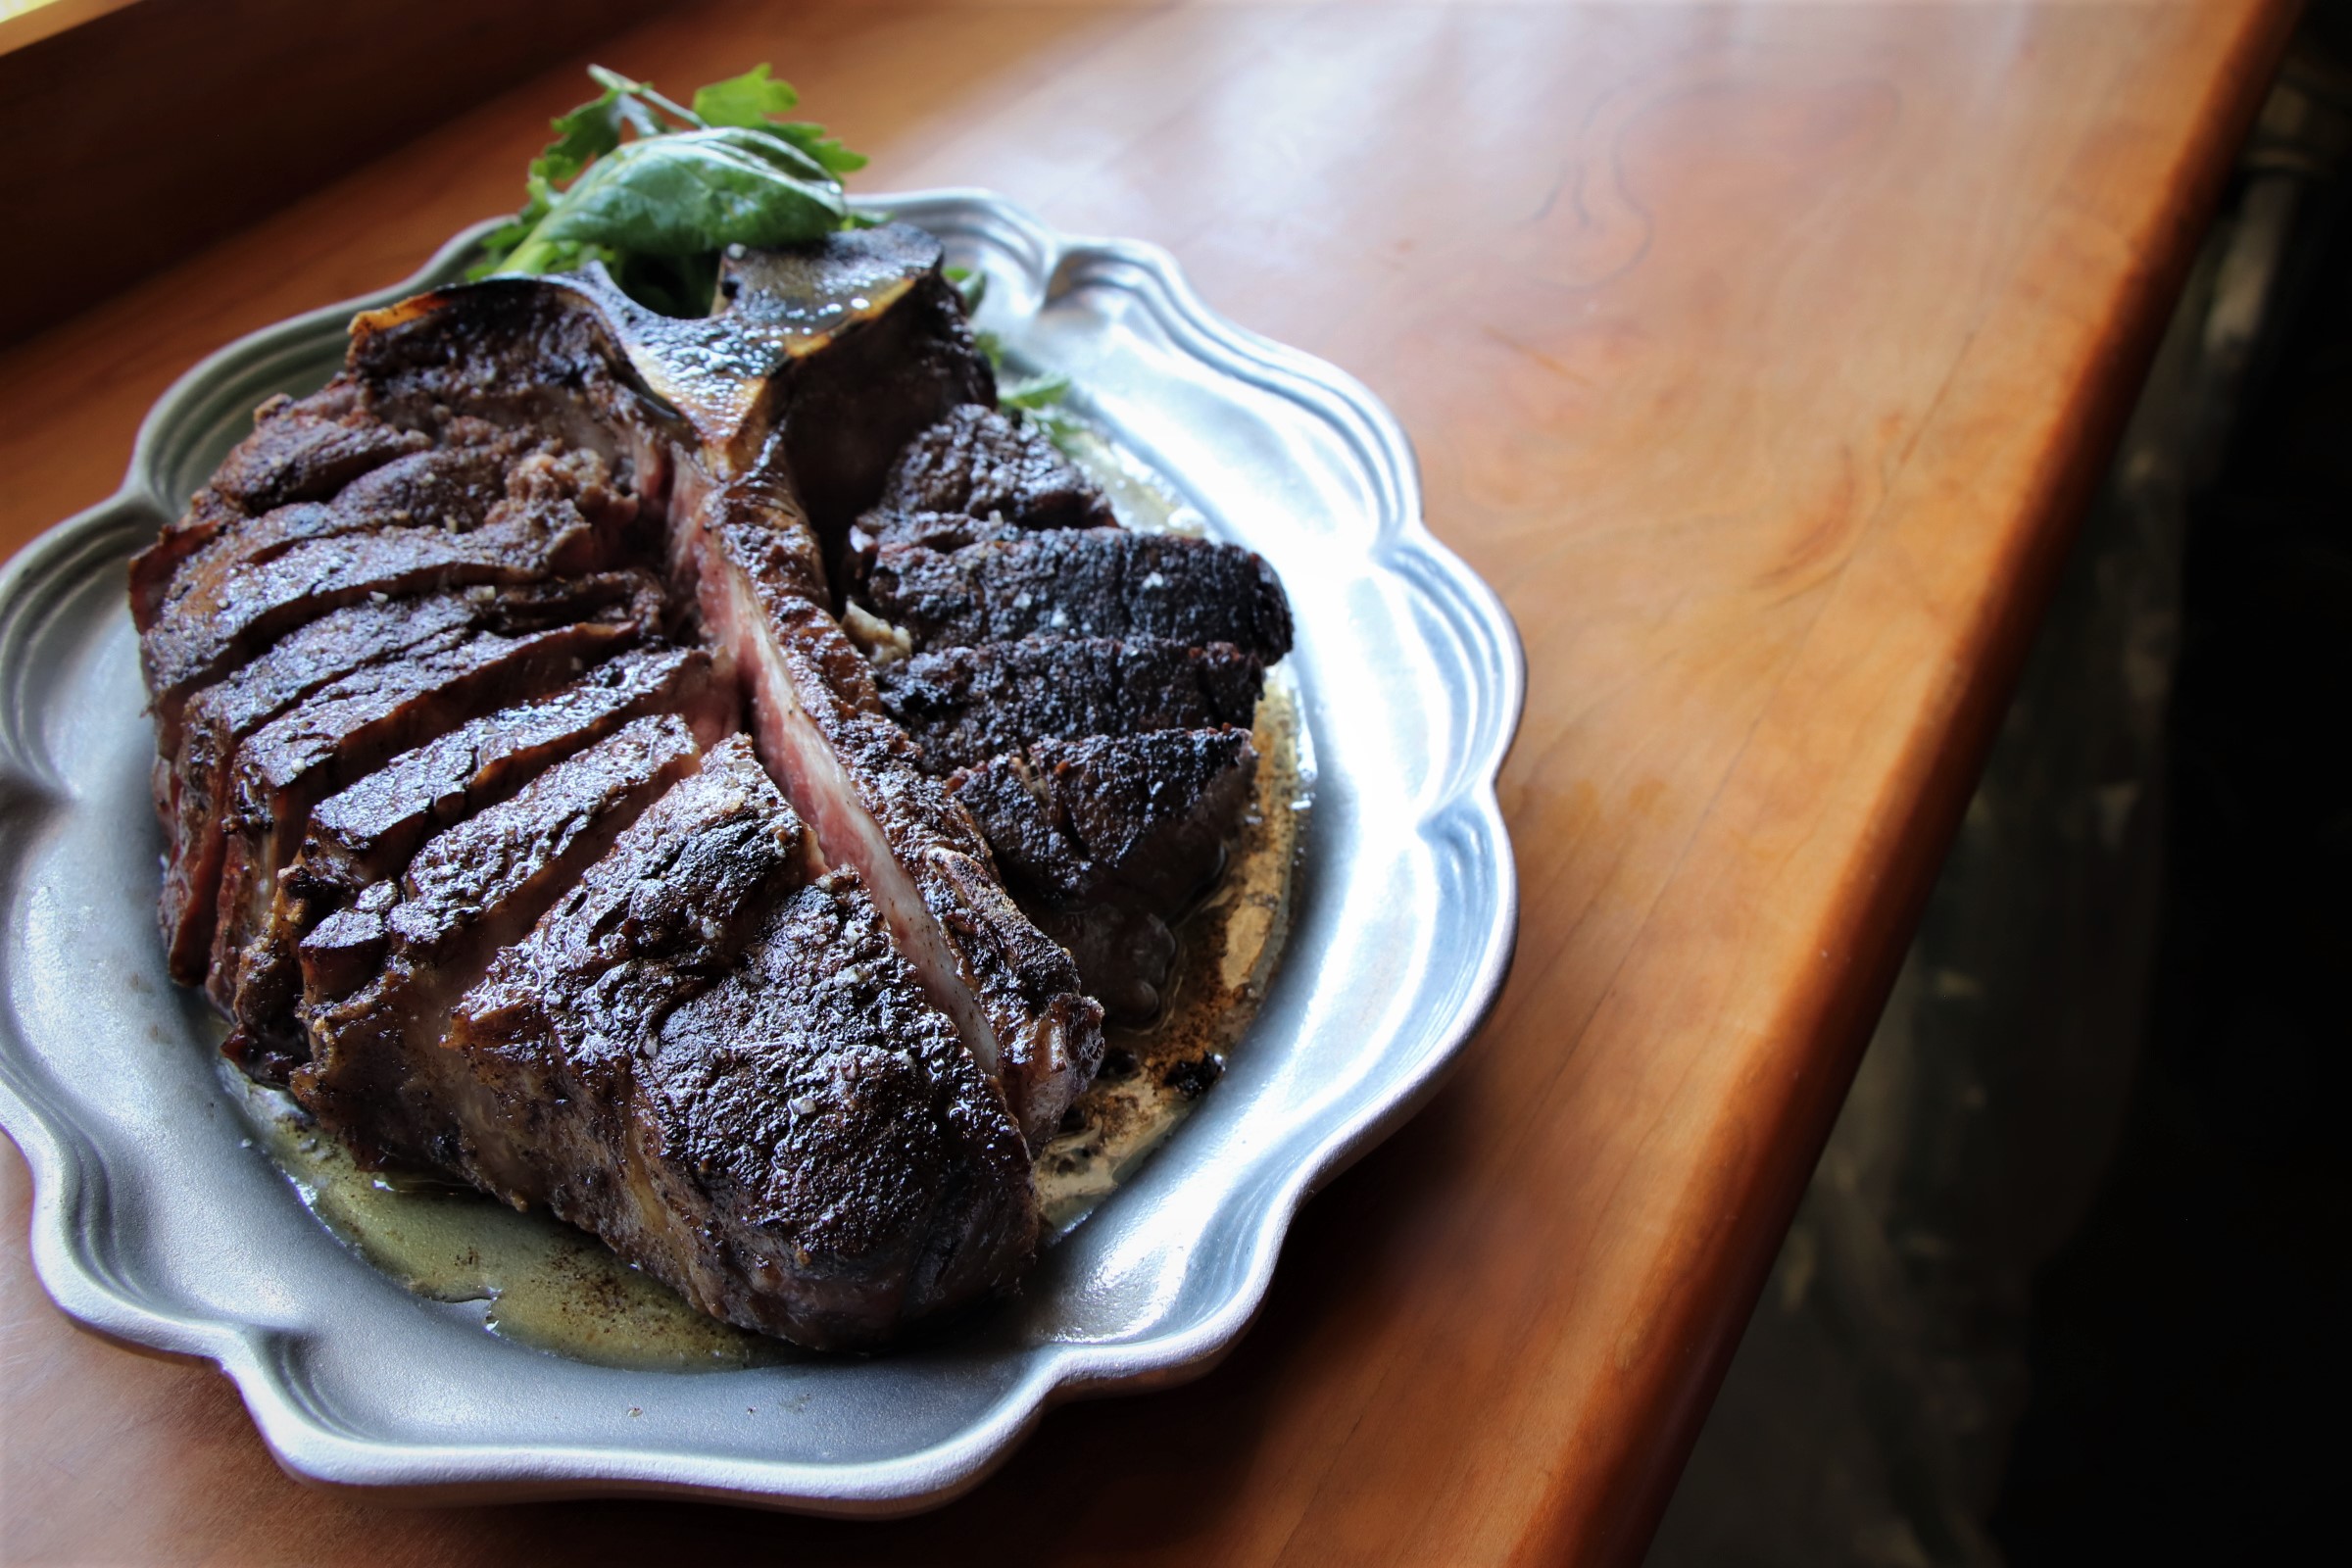  Flannery 30-Day Dry Aged Porterhouse 